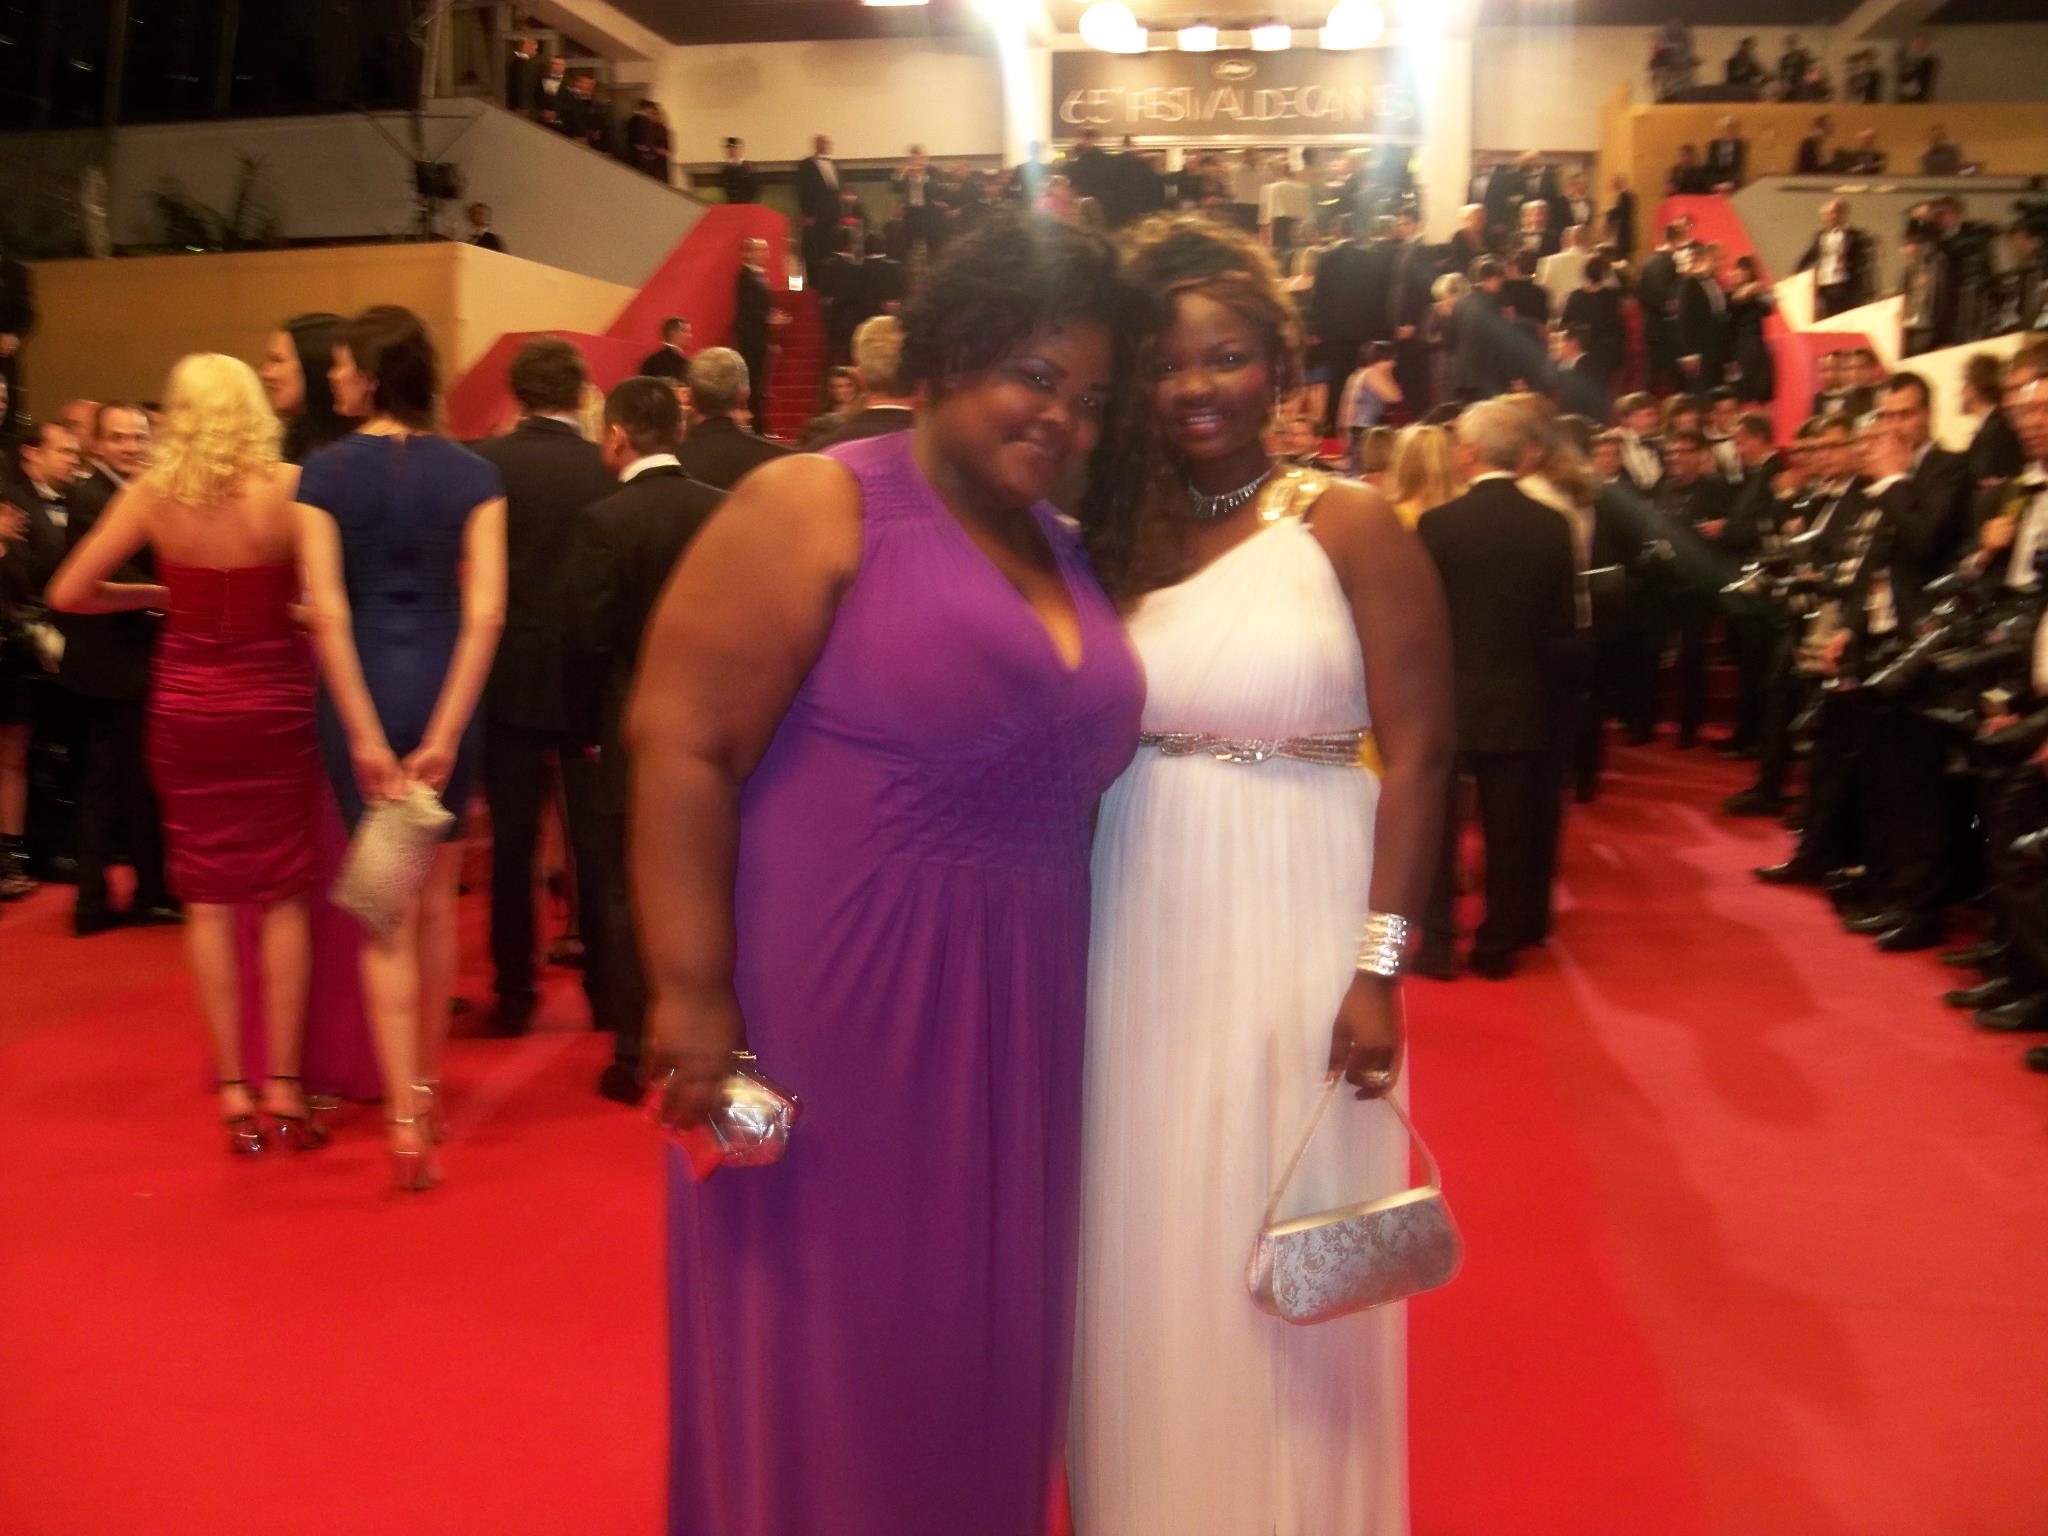 Alaina L Lewis and Faith Udeh at the Festival de Cannes Red Carpet Premiere of Hemingway and Gellhorn.